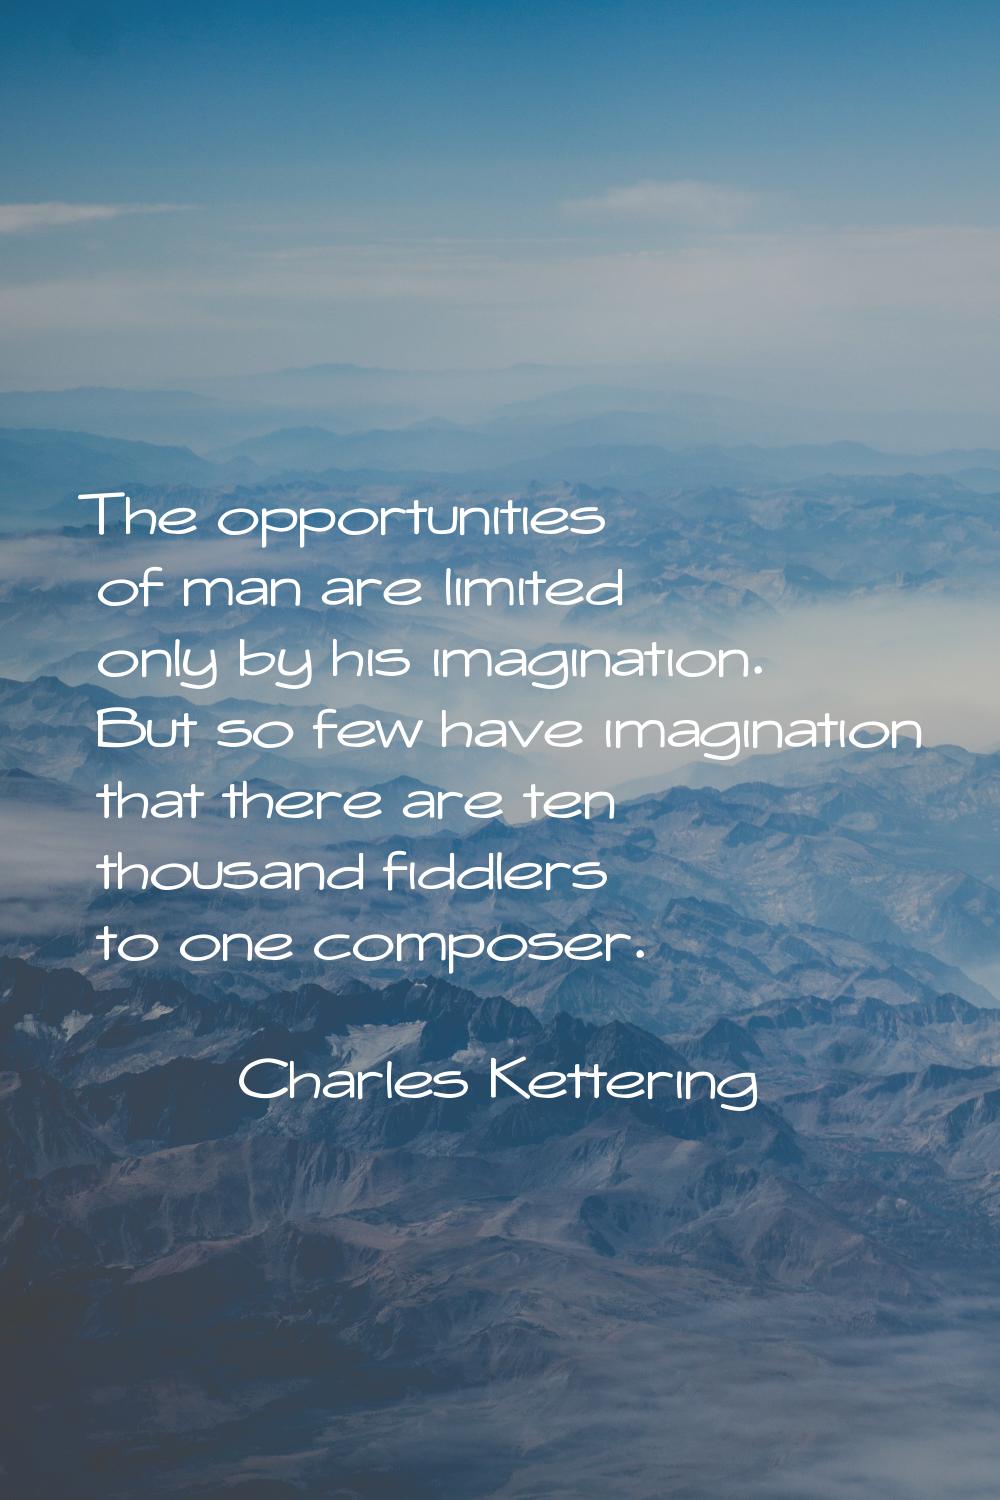 The opportunities of man are limited only by his imagination. But so few have imagination that ther